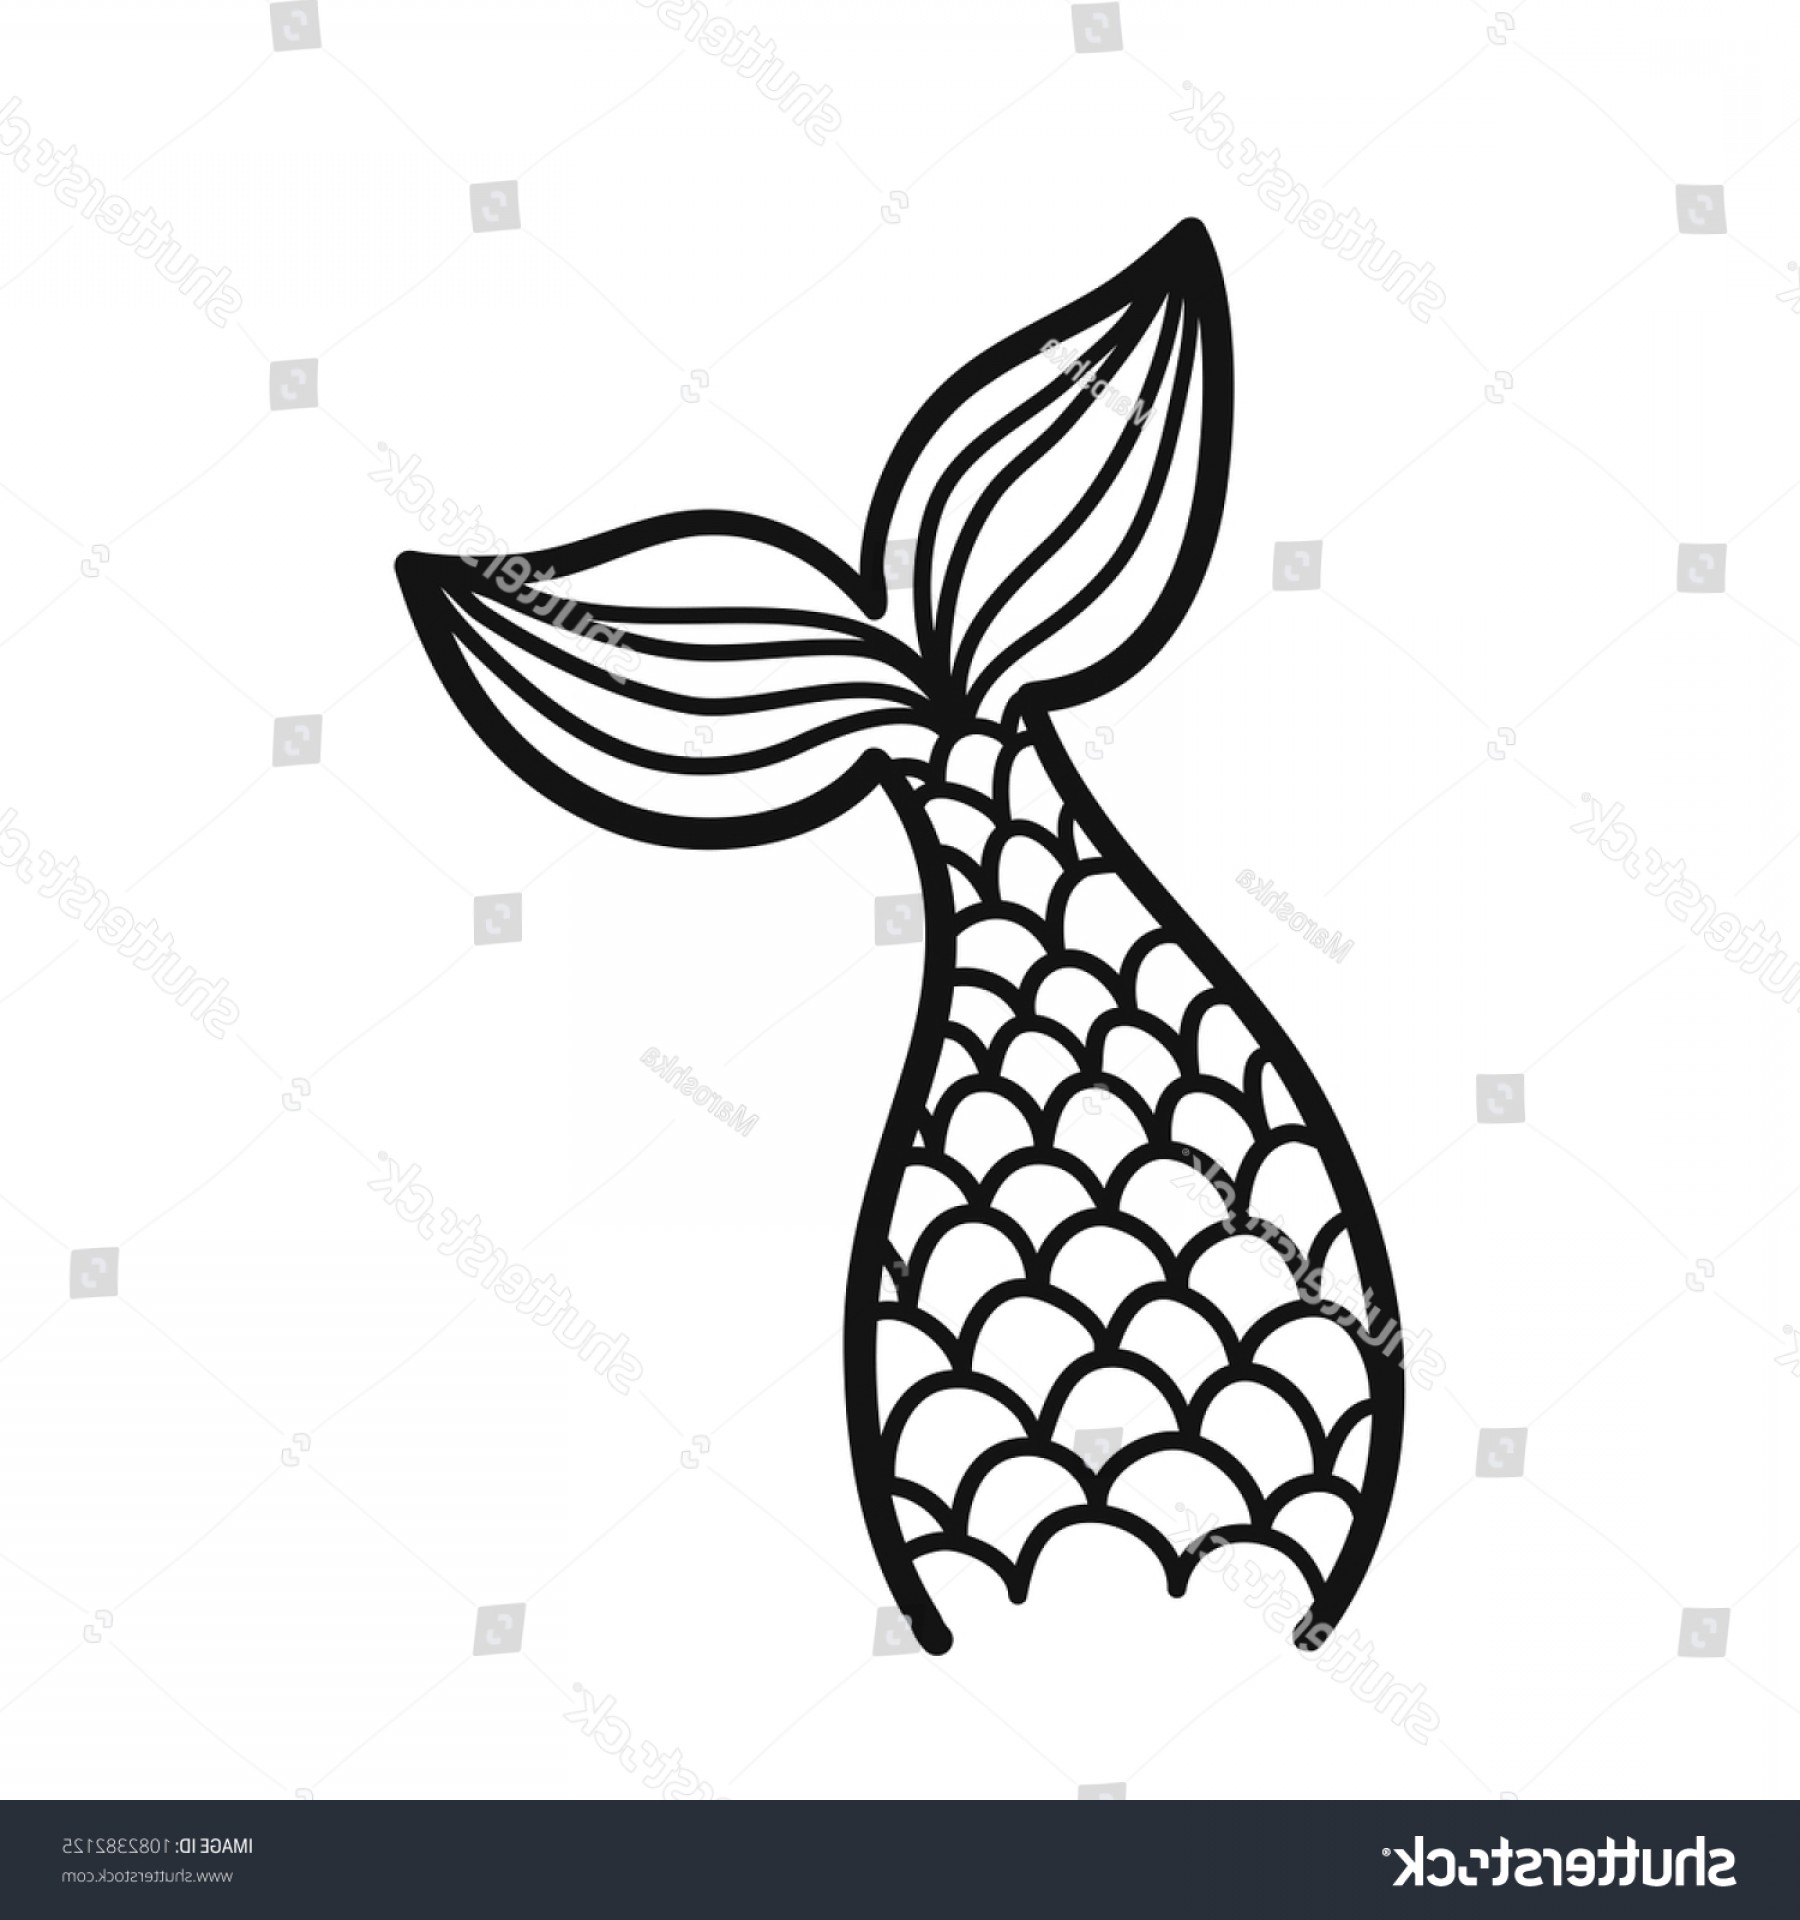 Download Mermaid Tail Vector at Vectorified.com | Collection of ...